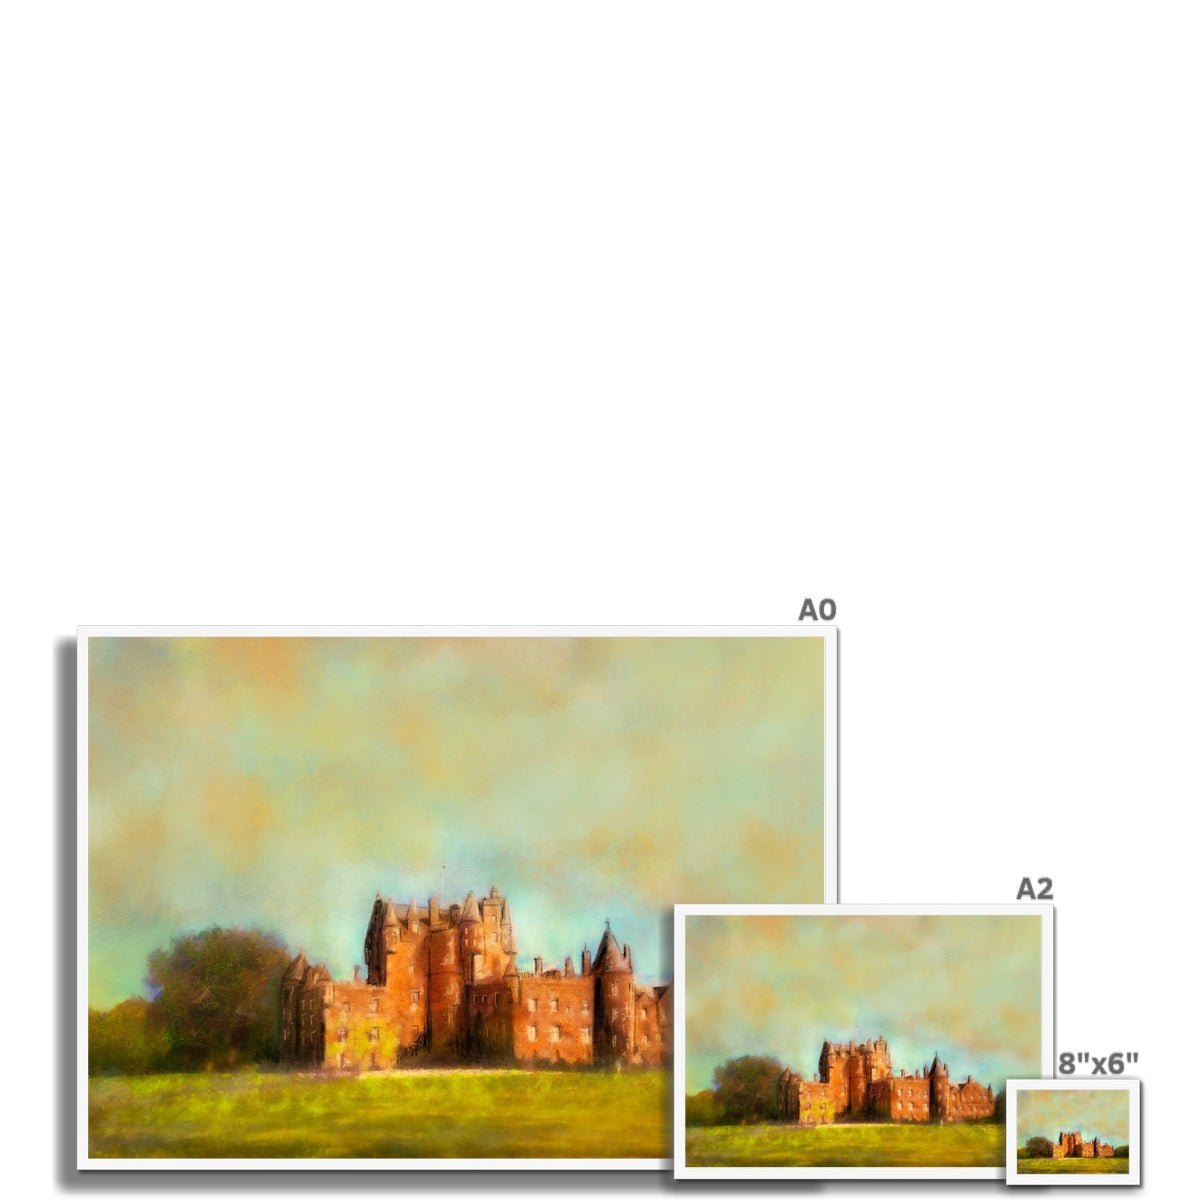 Glamis Castle Painting | Framed Prints From Scotland-Framed Prints-Historic & Iconic Scotland Art Gallery-Paintings, Prints, Homeware, Art Gifts From Scotland By Scottish Artist Kevin Hunter